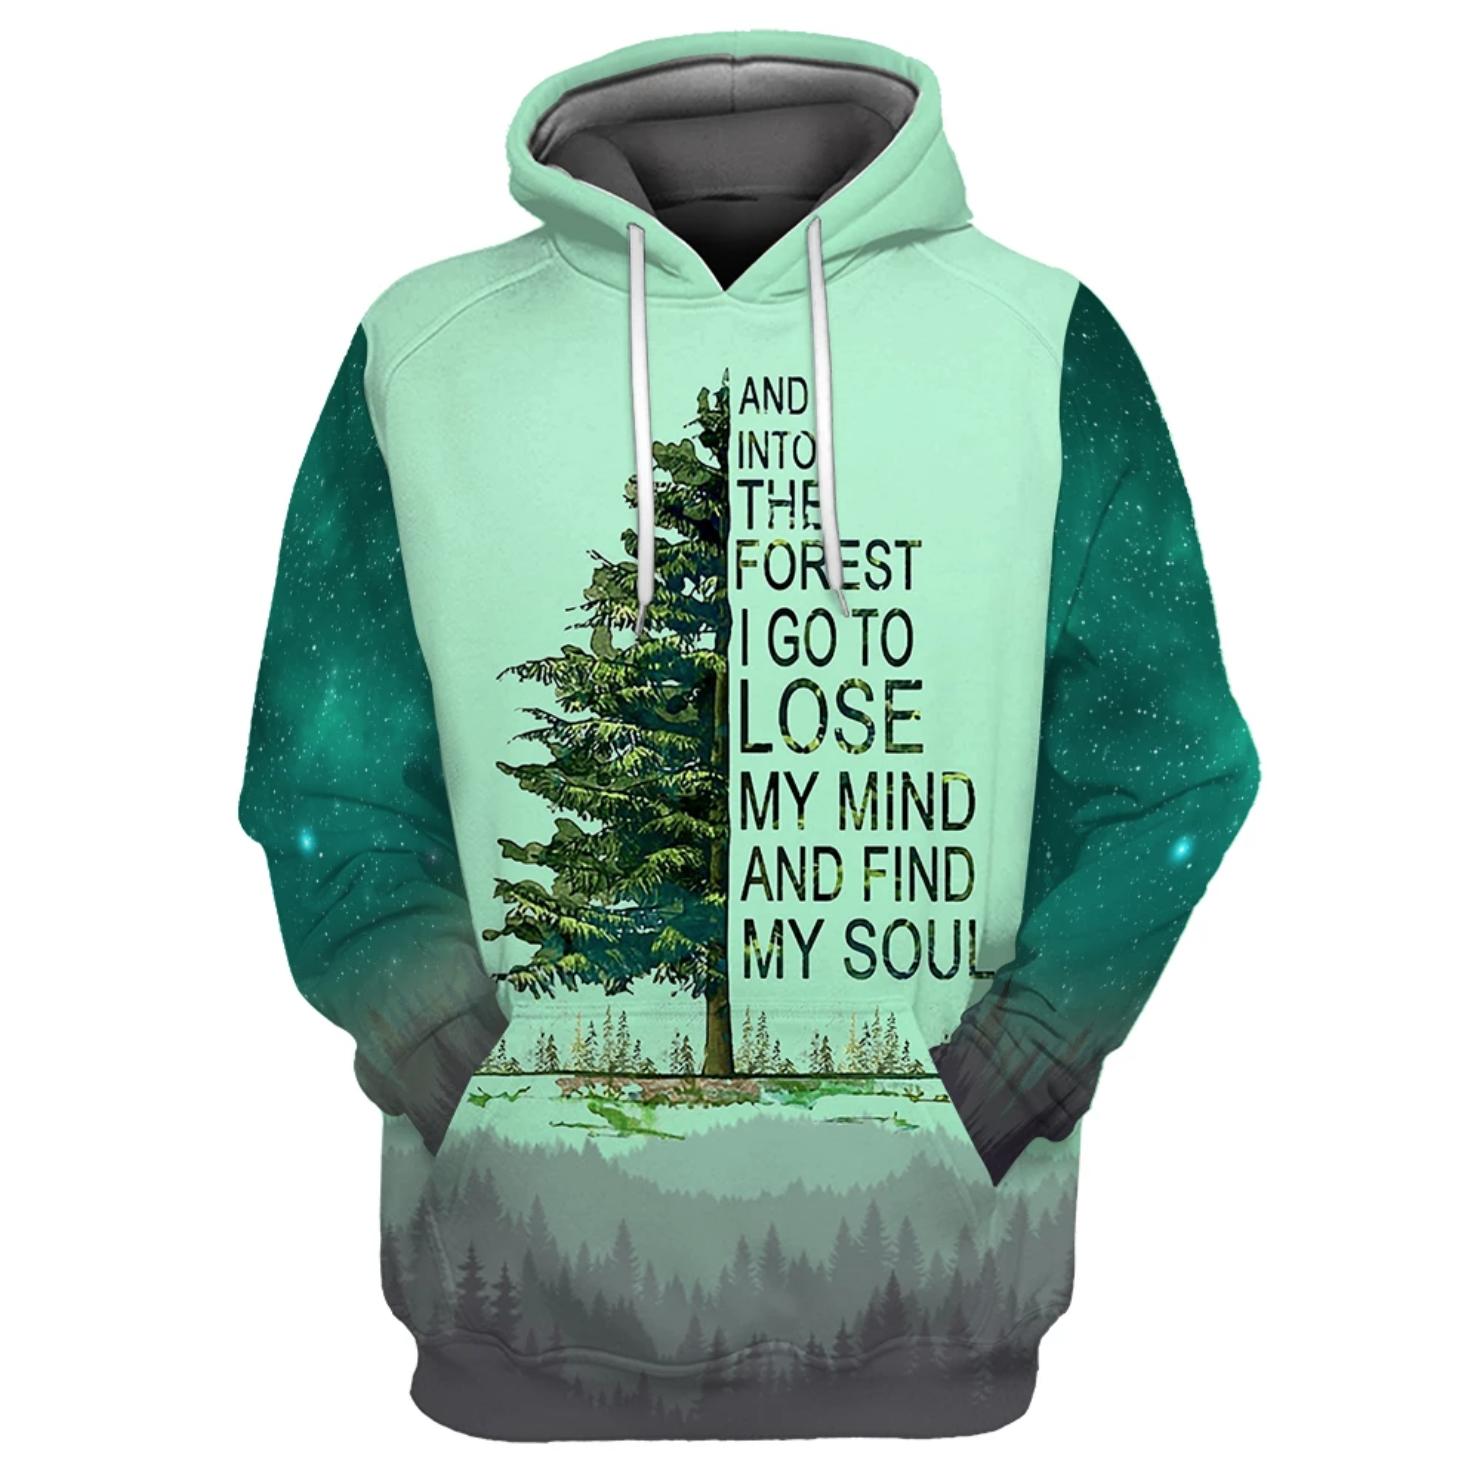 Into the forest I go to lose my mind and find my soul hoodie